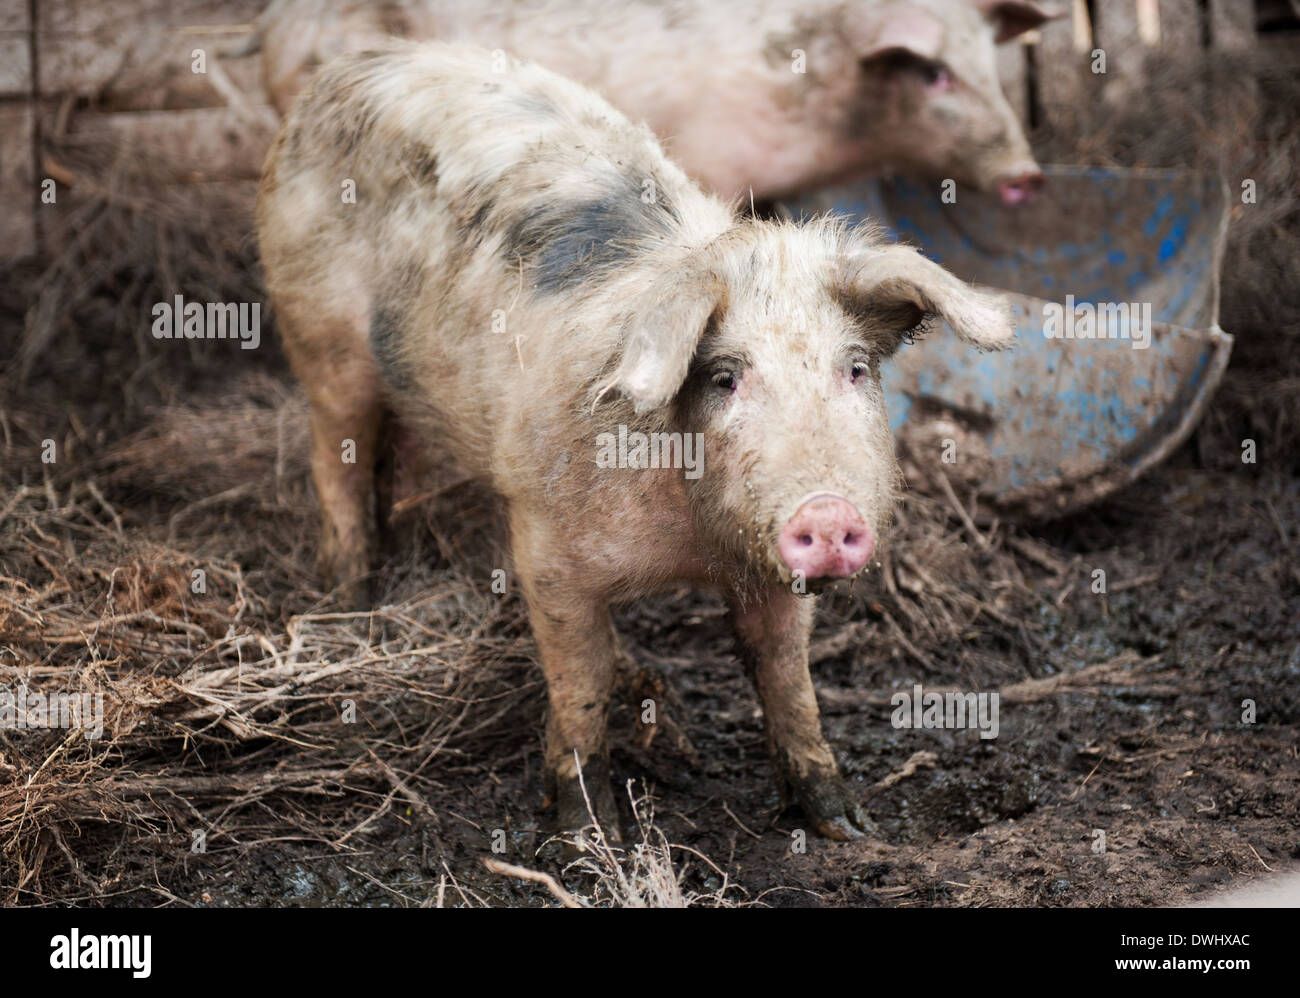 Young dirty pig on a pig farm Stock Photo